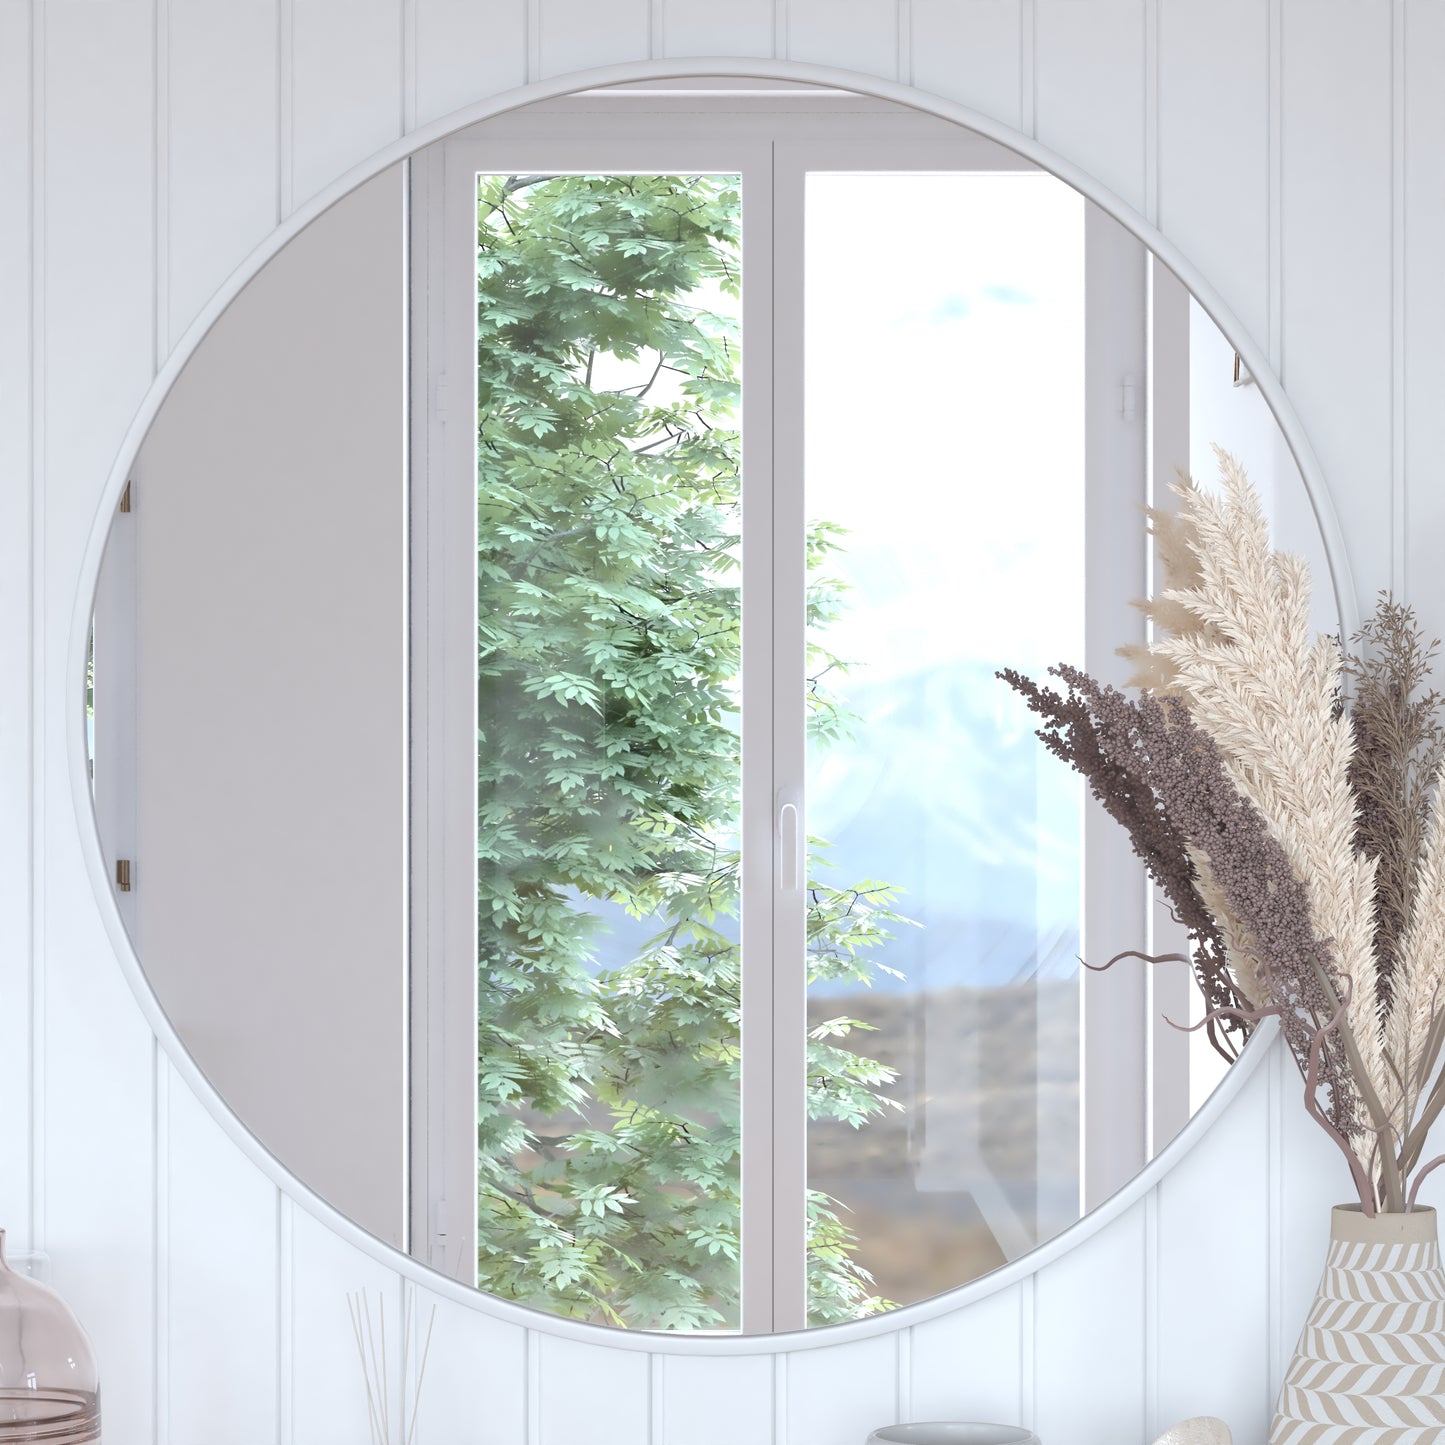 Silver 36" Round Wall Mirror HFKHD-6GD-CRE8-202315-GG